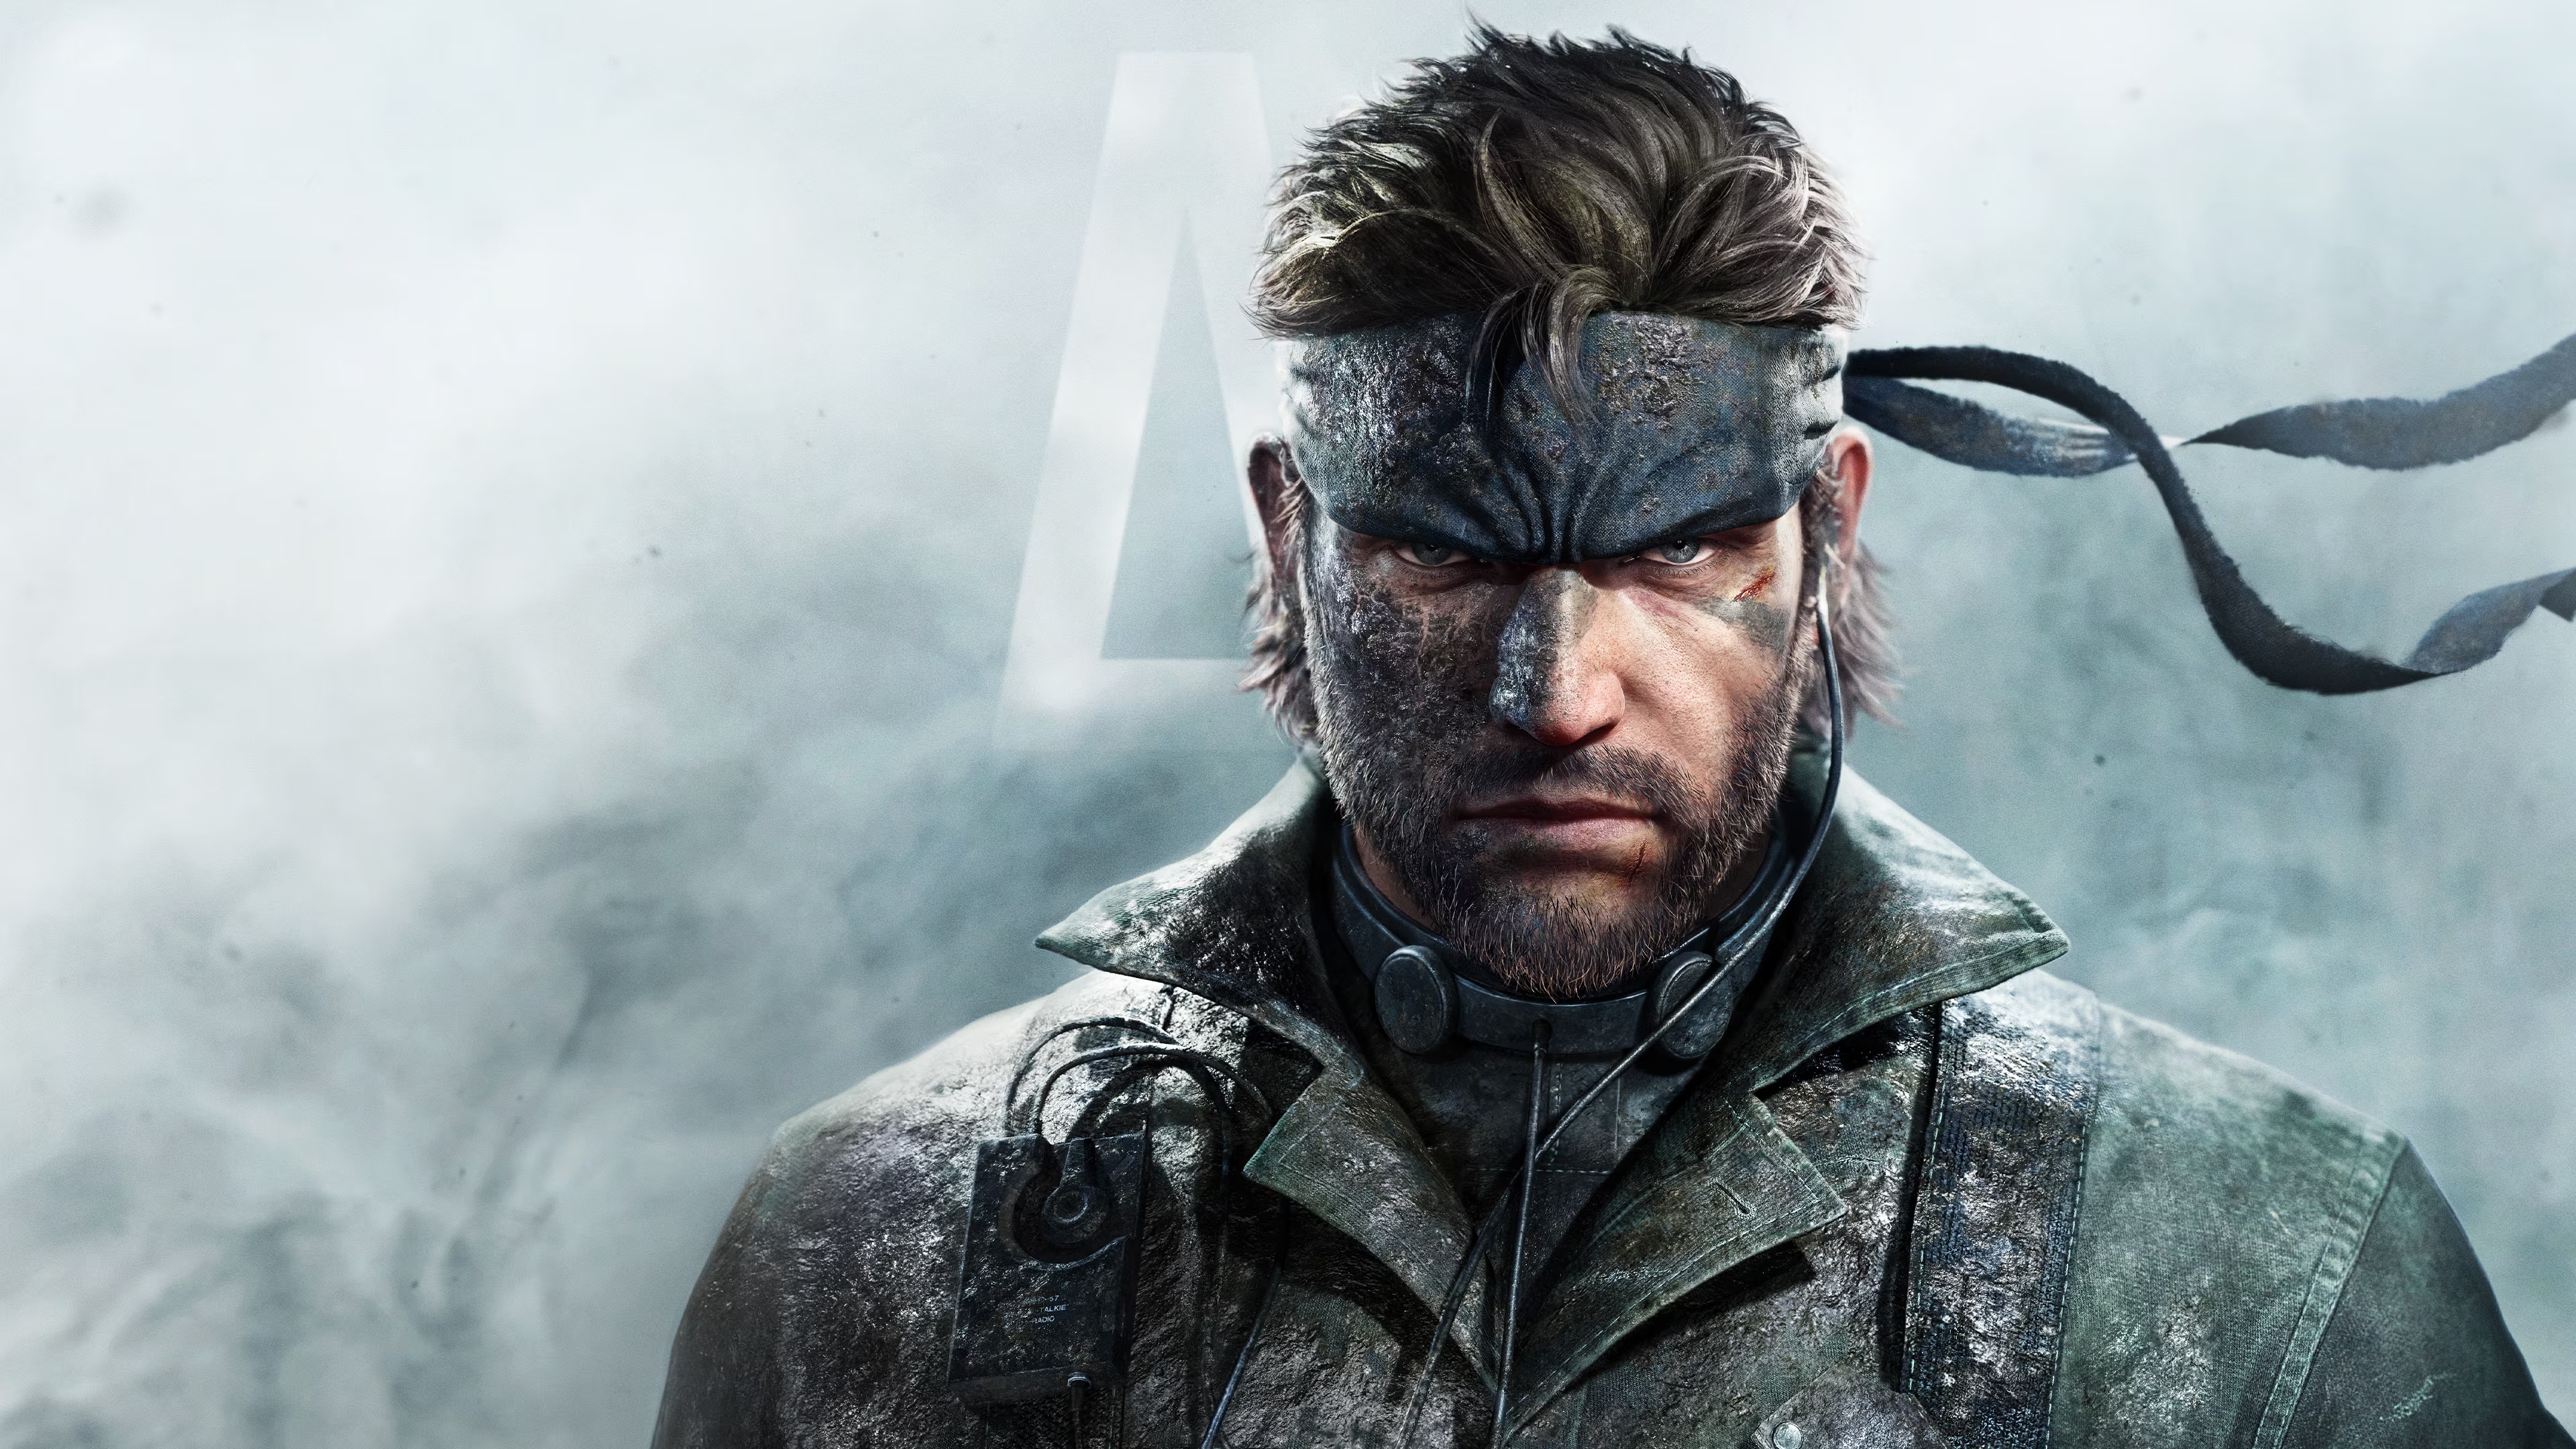 Video Game Metal Gear Solid Δ: Snake Eater HD Wallpaper | Background Image